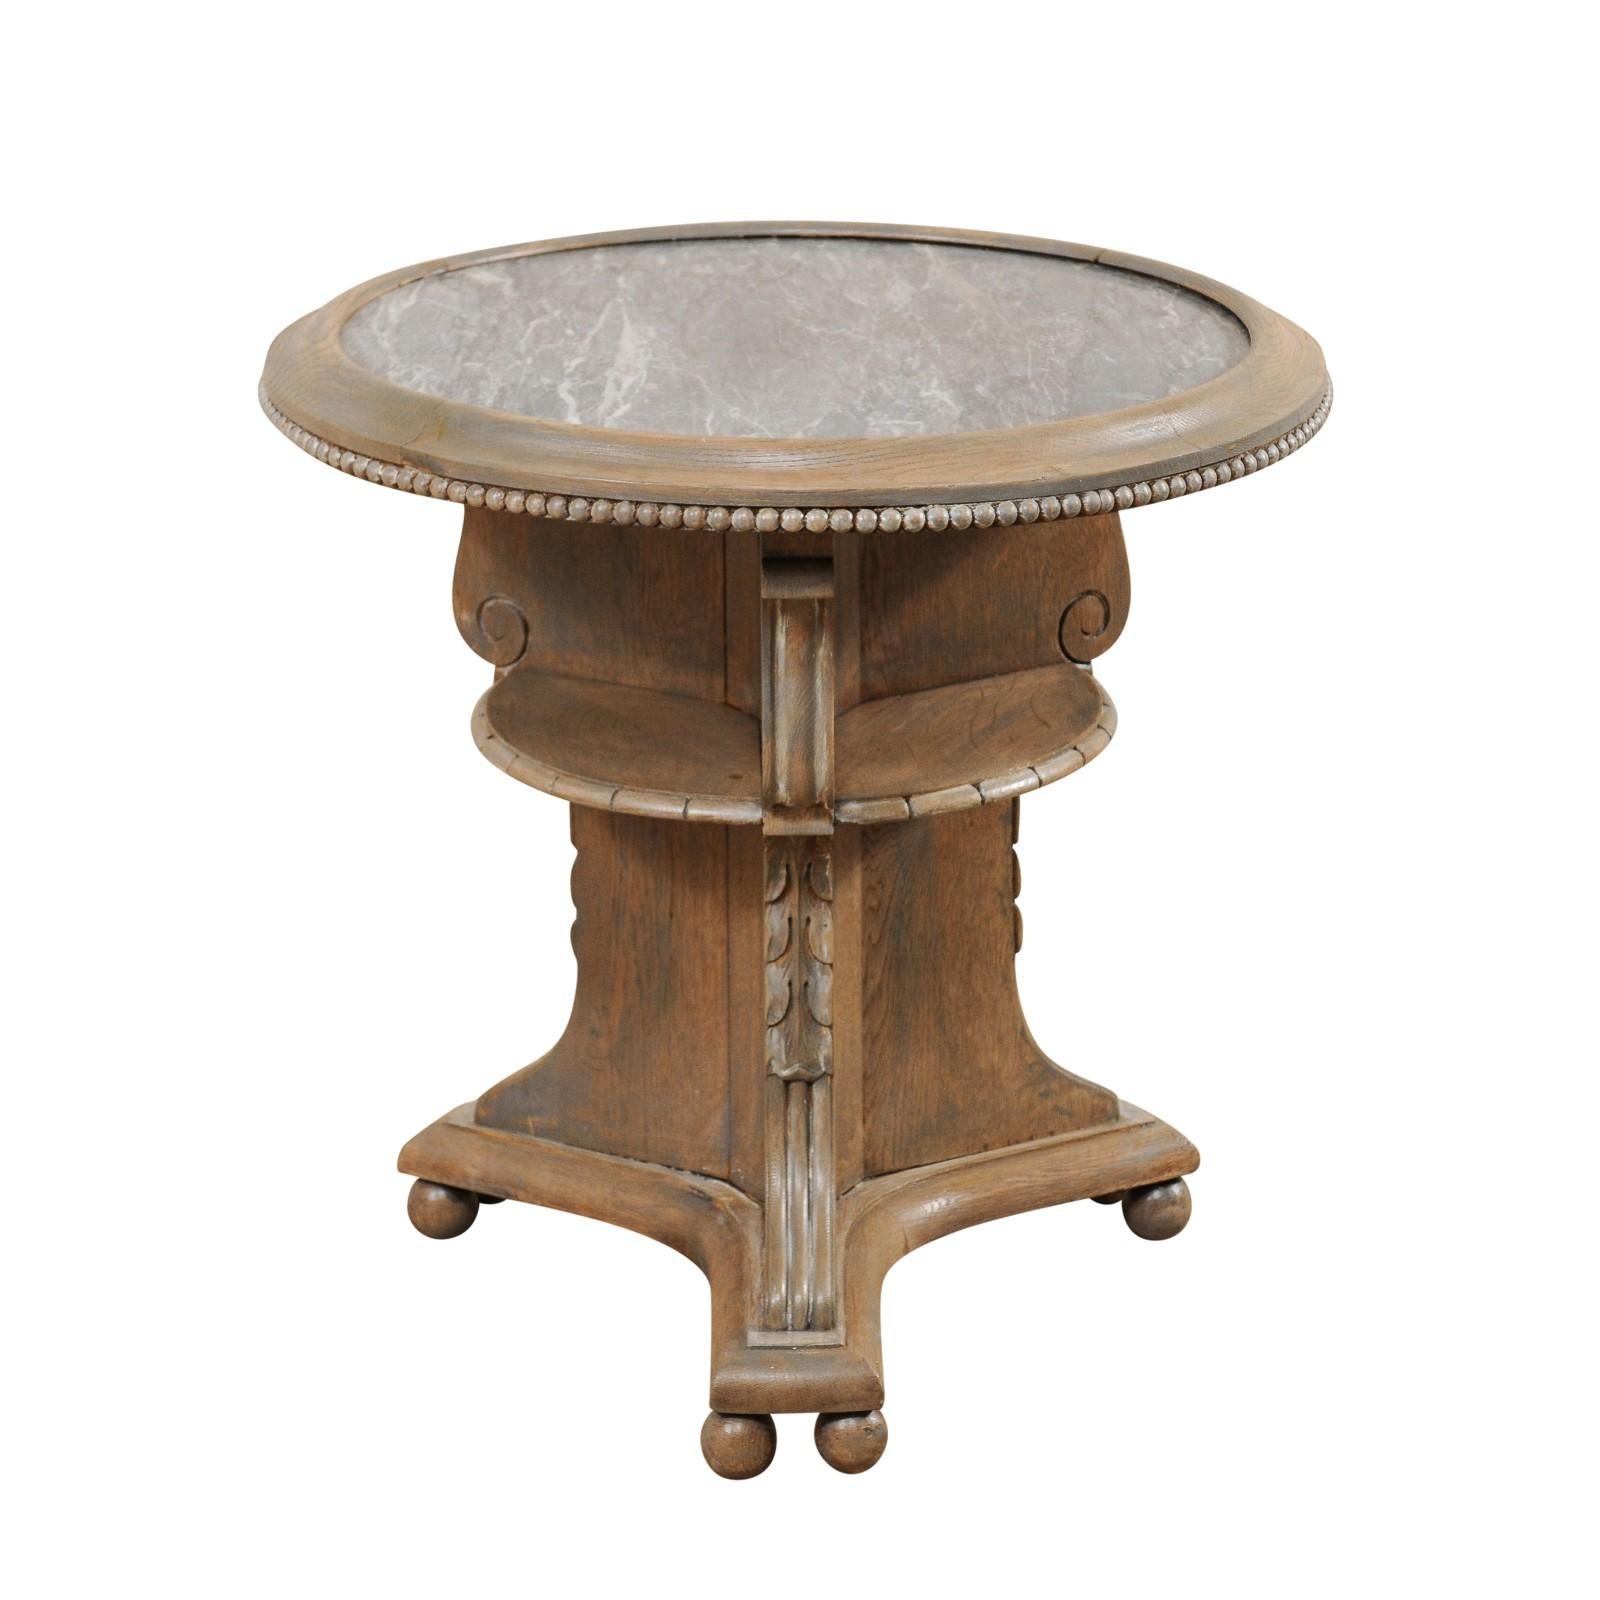 Swedish Early 20th Century Round Painted Wood Occasional Table with Marble Top